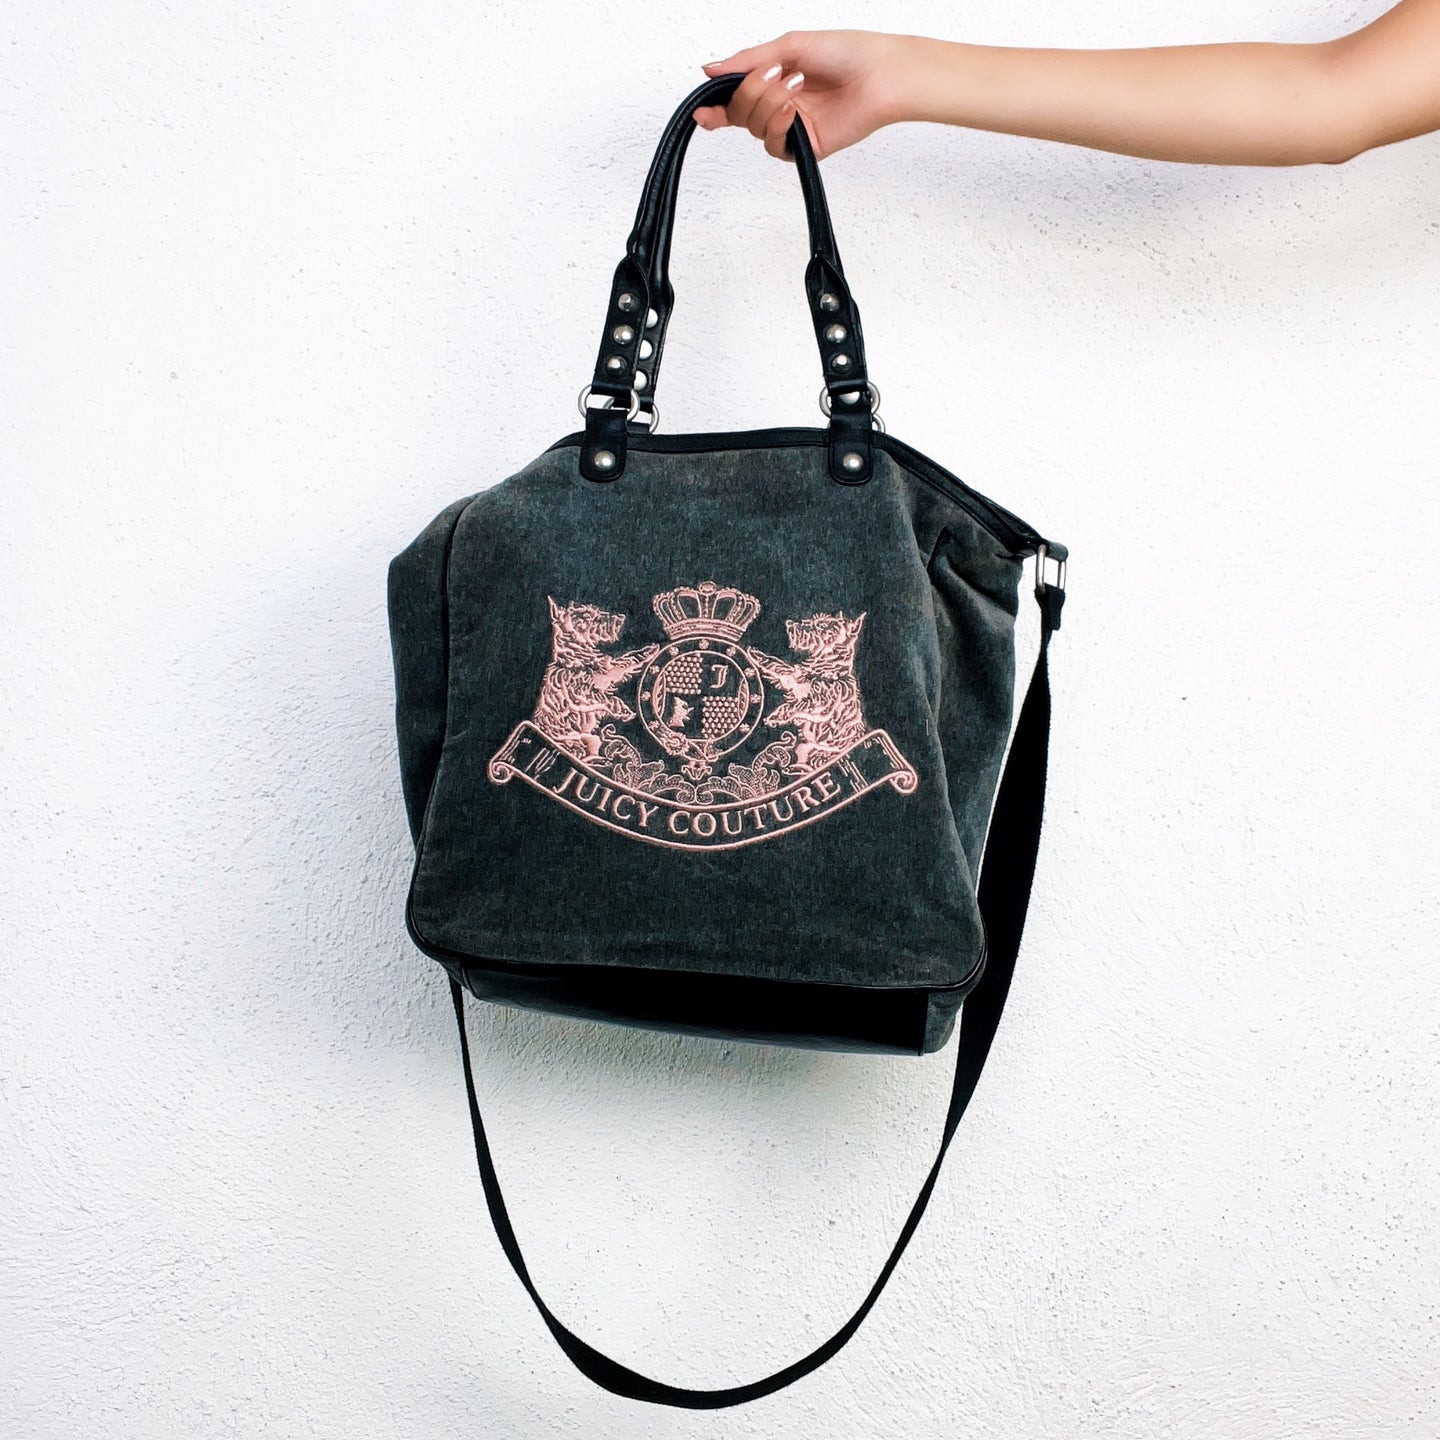 Juicy Couture Velour Tote